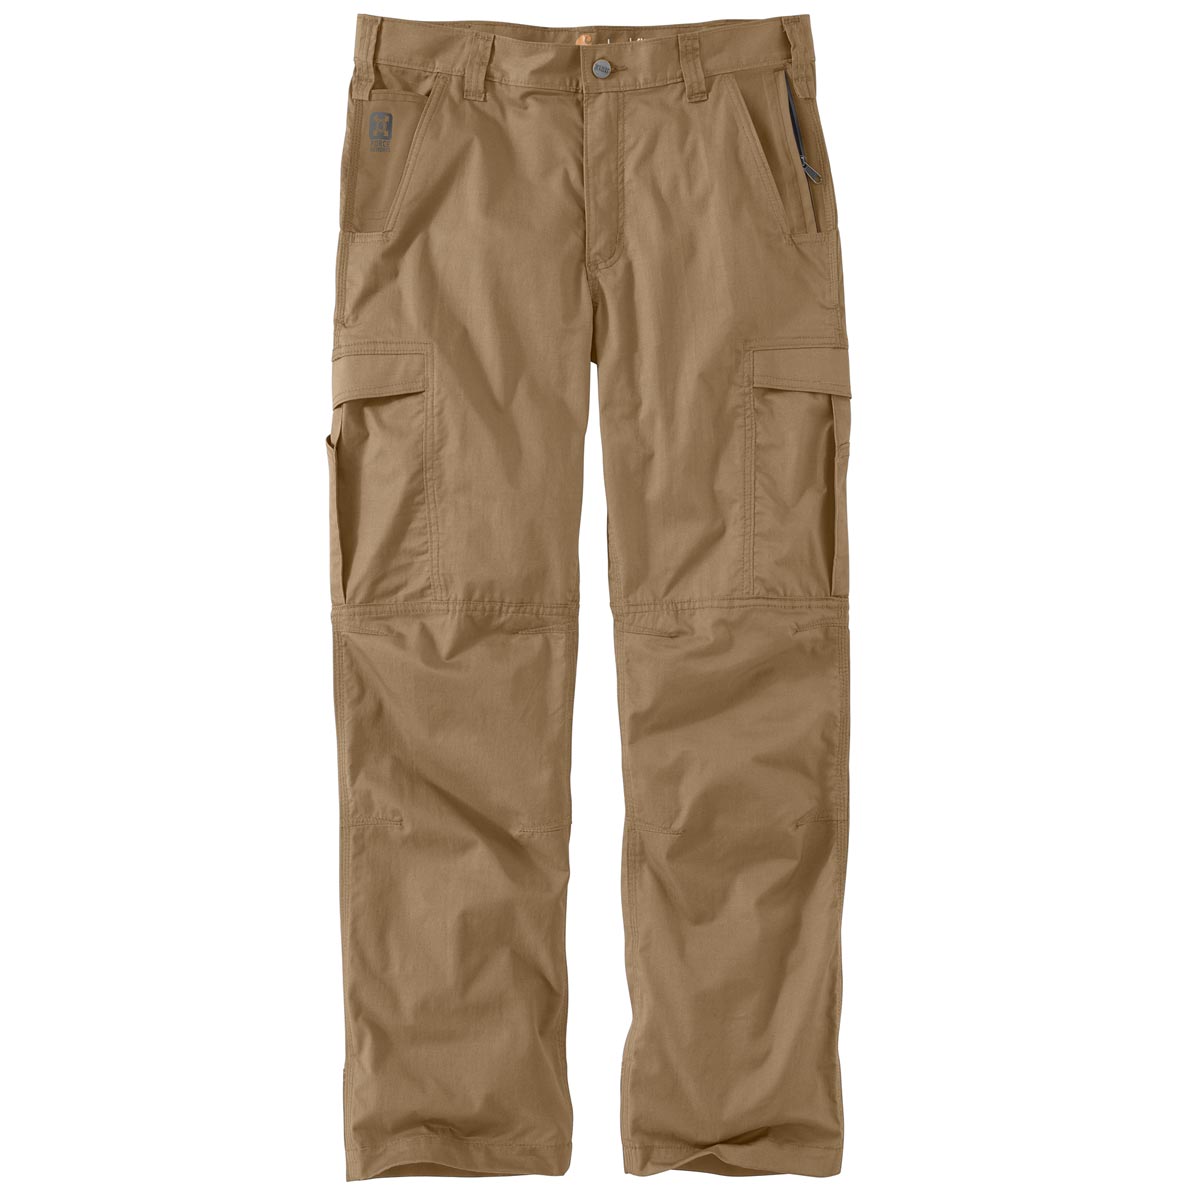 Carhartt Mens Force Extremes Cargo Pant